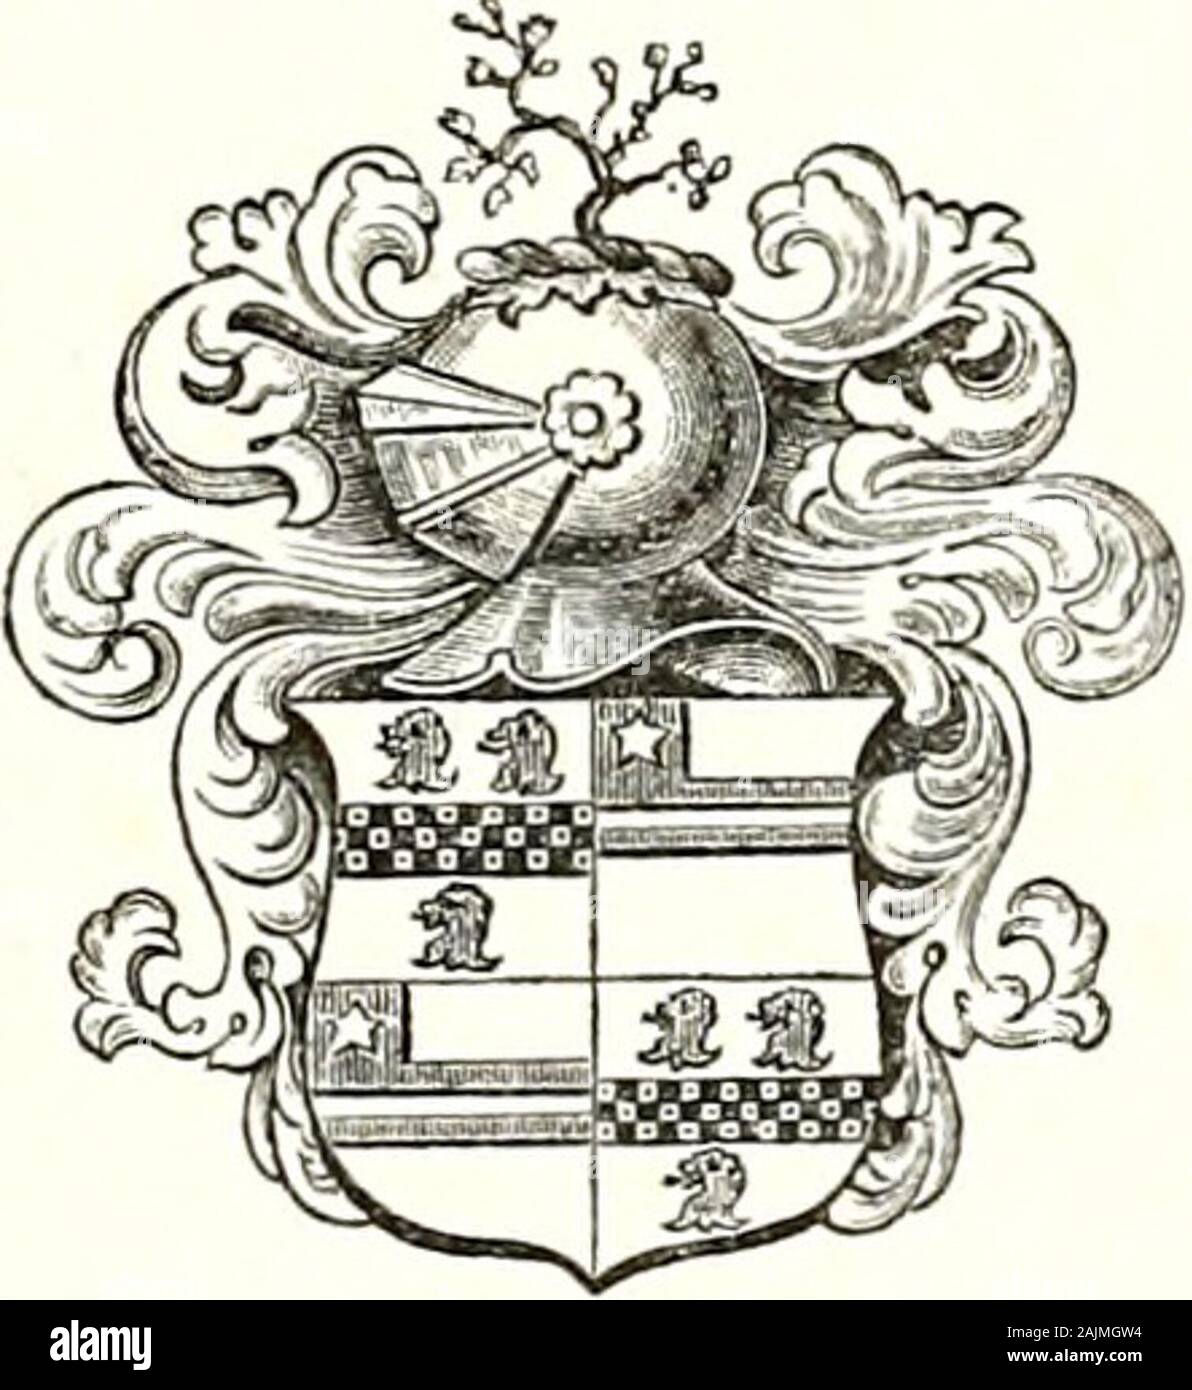 The Birkbecks of Westmorland and their descendants . rnby suit, however,dragged on to 1743. ( 13 ) BIRK BECKS OF HORNBY. The two most prominent families of the Birkbecks were those of Hornbyand Orton ; the former were descended from THOMAS BYRKEBEKE of Carlisle, who is said to have beenGovernor of that city, but I can find no good authority for this, althoughhe was certainly a man of some position ; indeed from Machells account,written in the latter half of the seventeenth century (vide p. 35), it wouldappear that his ancestors had for at least five generations married into veryleading familie Stock Photo